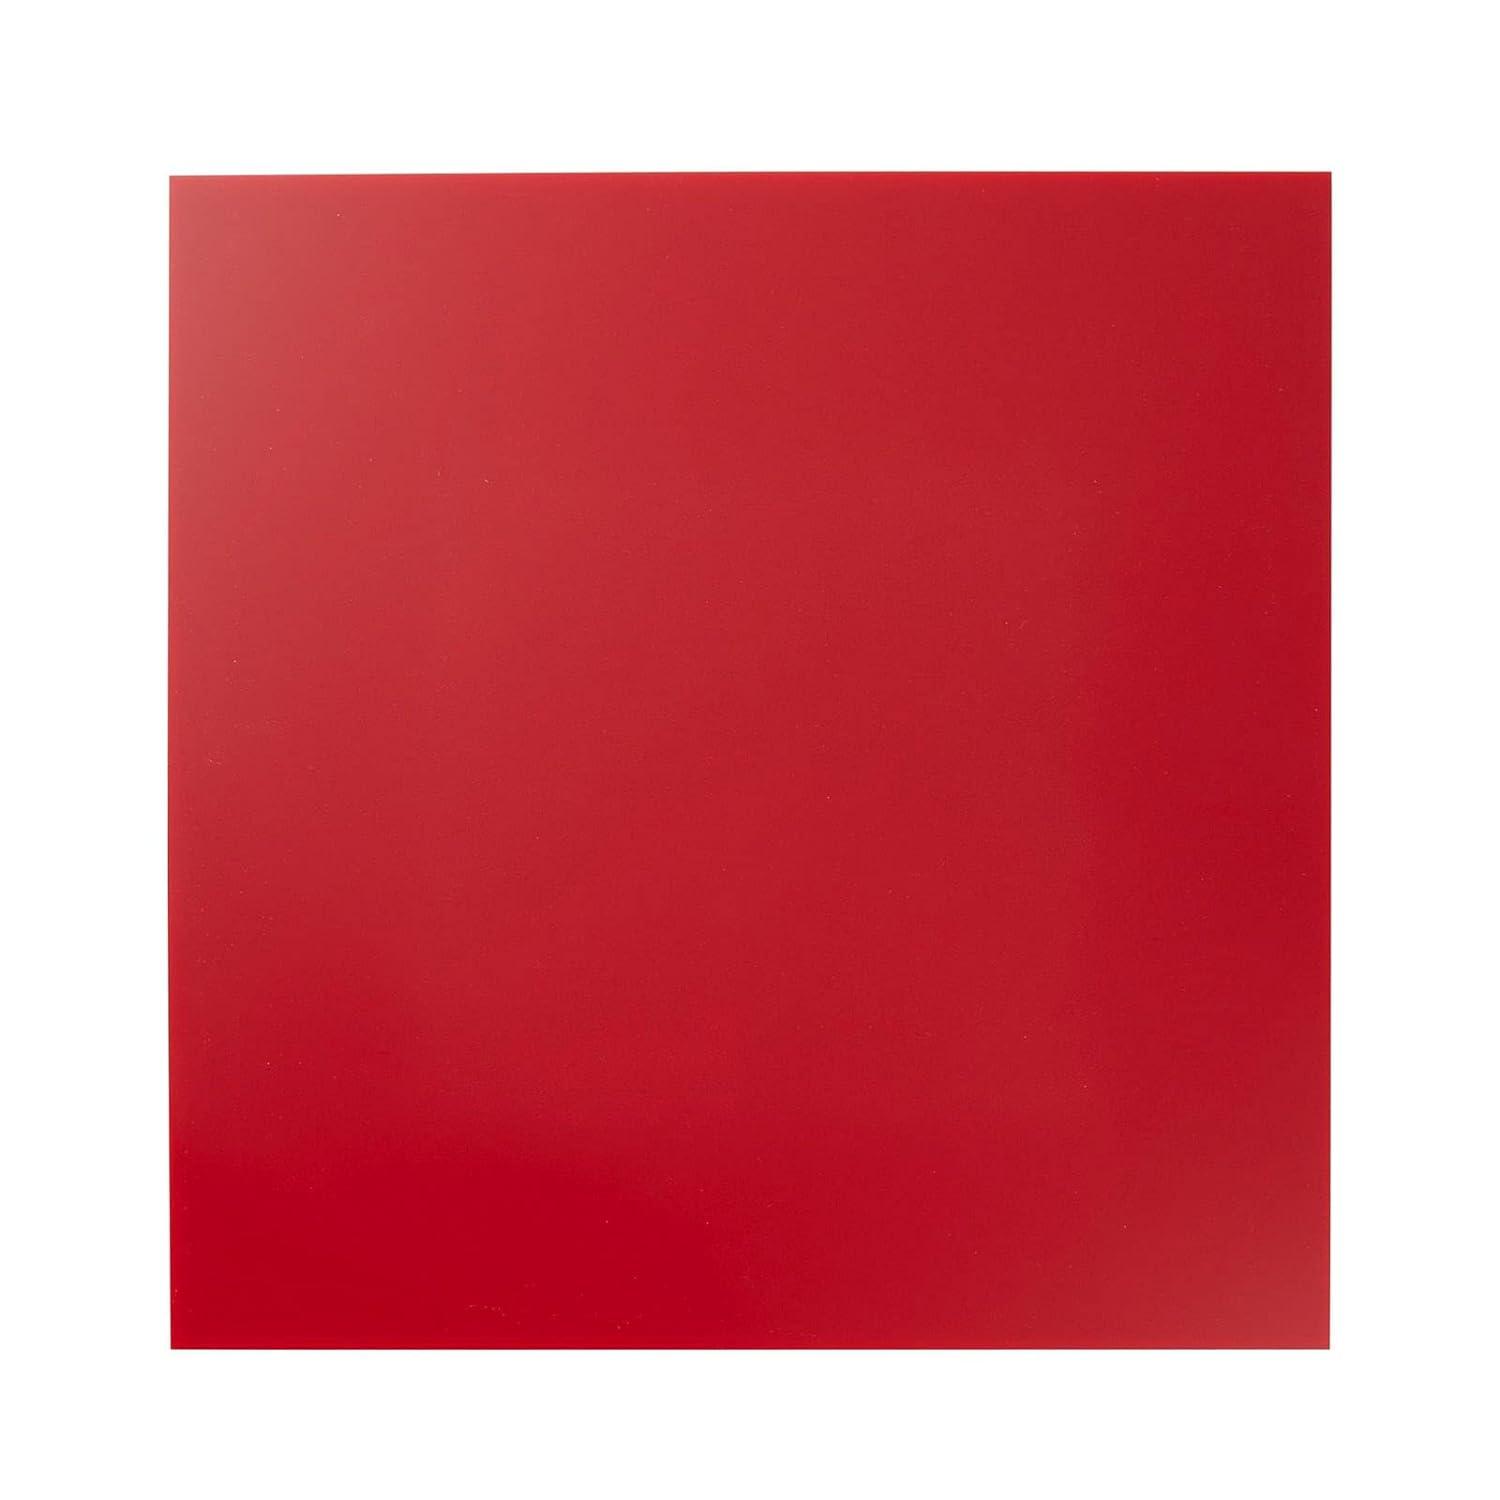 Colored Acrylic Square Blanks for Crafts, 1/8 Inch Thick (3mm